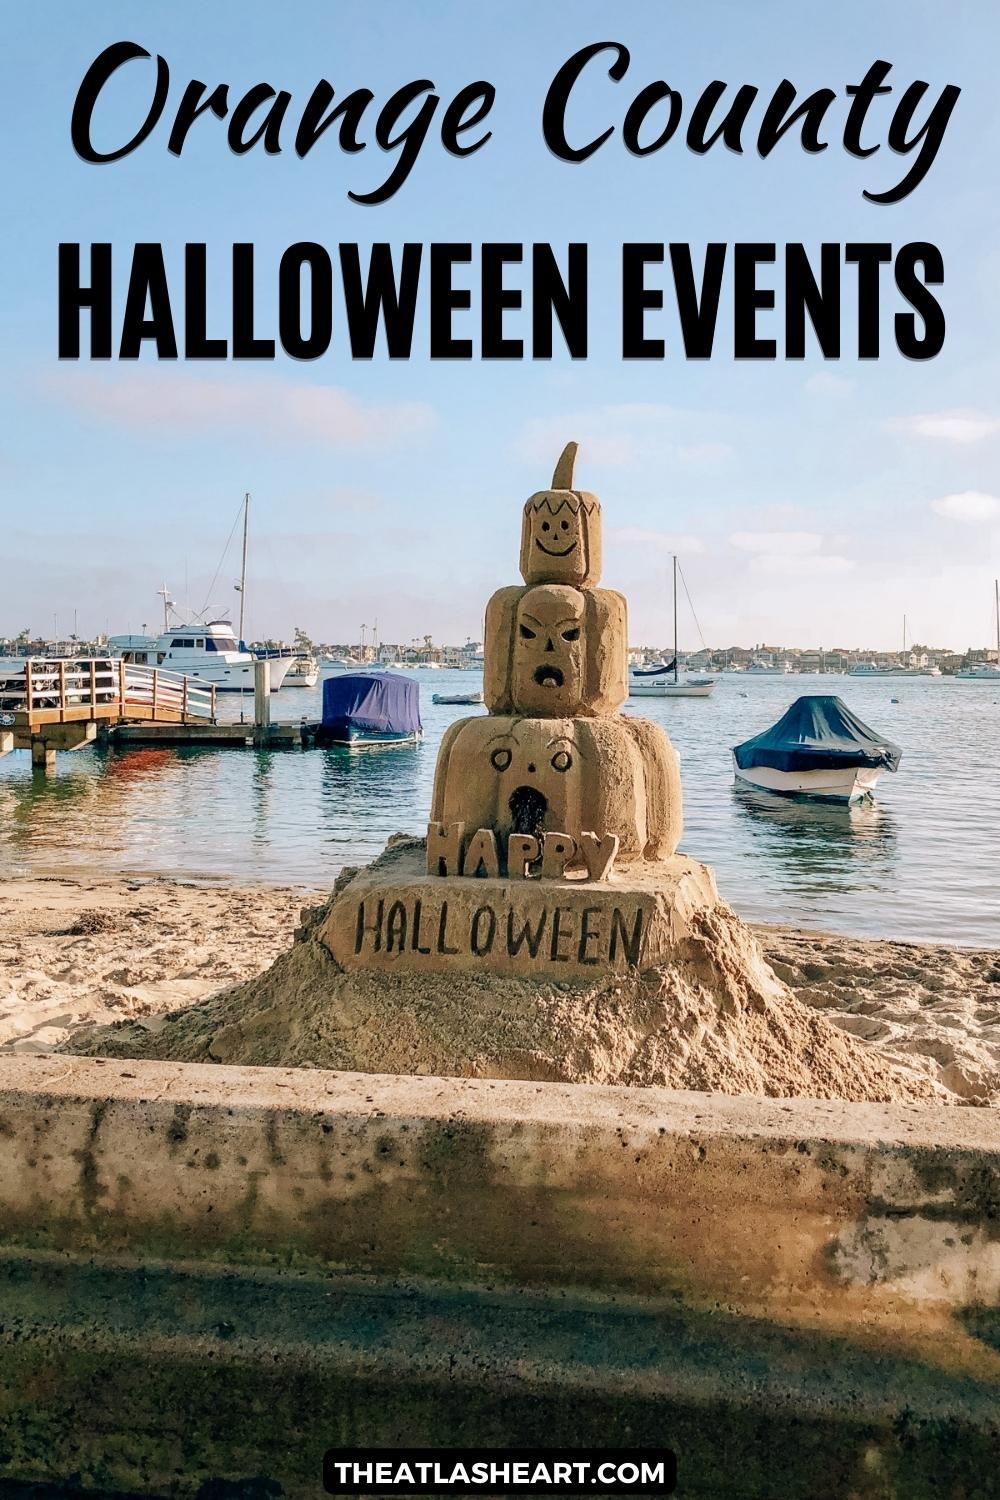 A Hallloween-themed sandcastle with the words, "Happy Halloween" carved into it on a beach with a a dock and boats in the background, with the text overlay, "Halloween Events in Orange County."